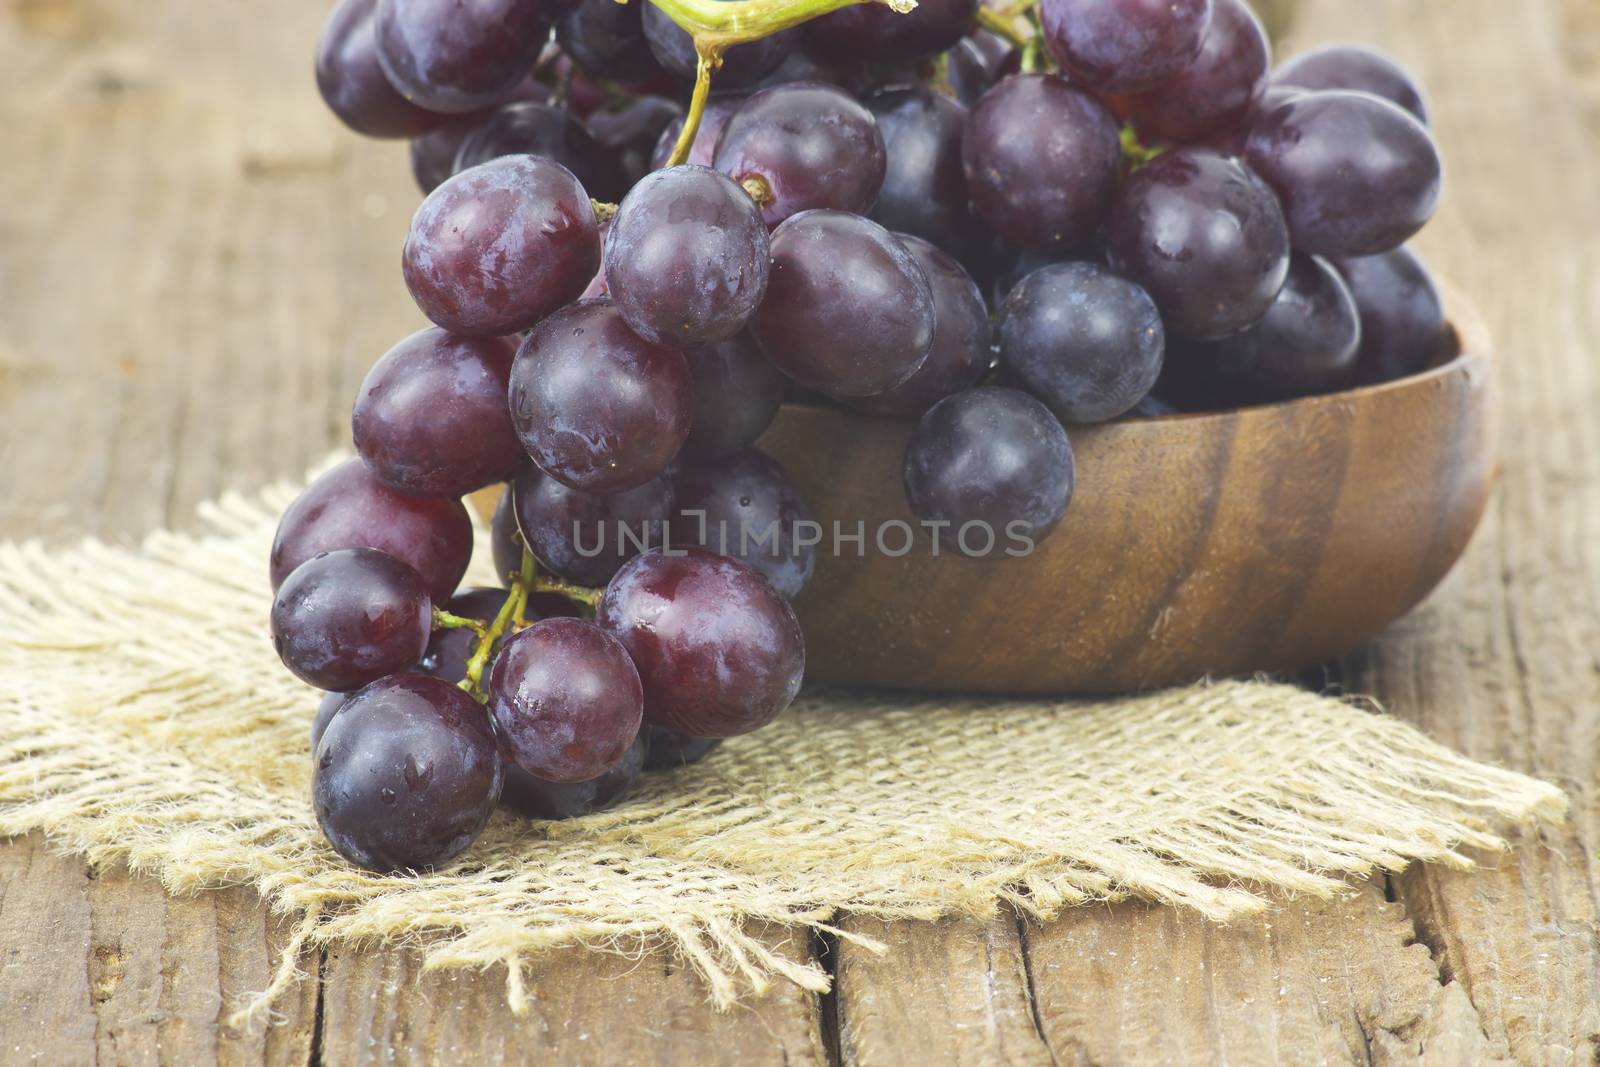 grapes in a bowl on wooden background